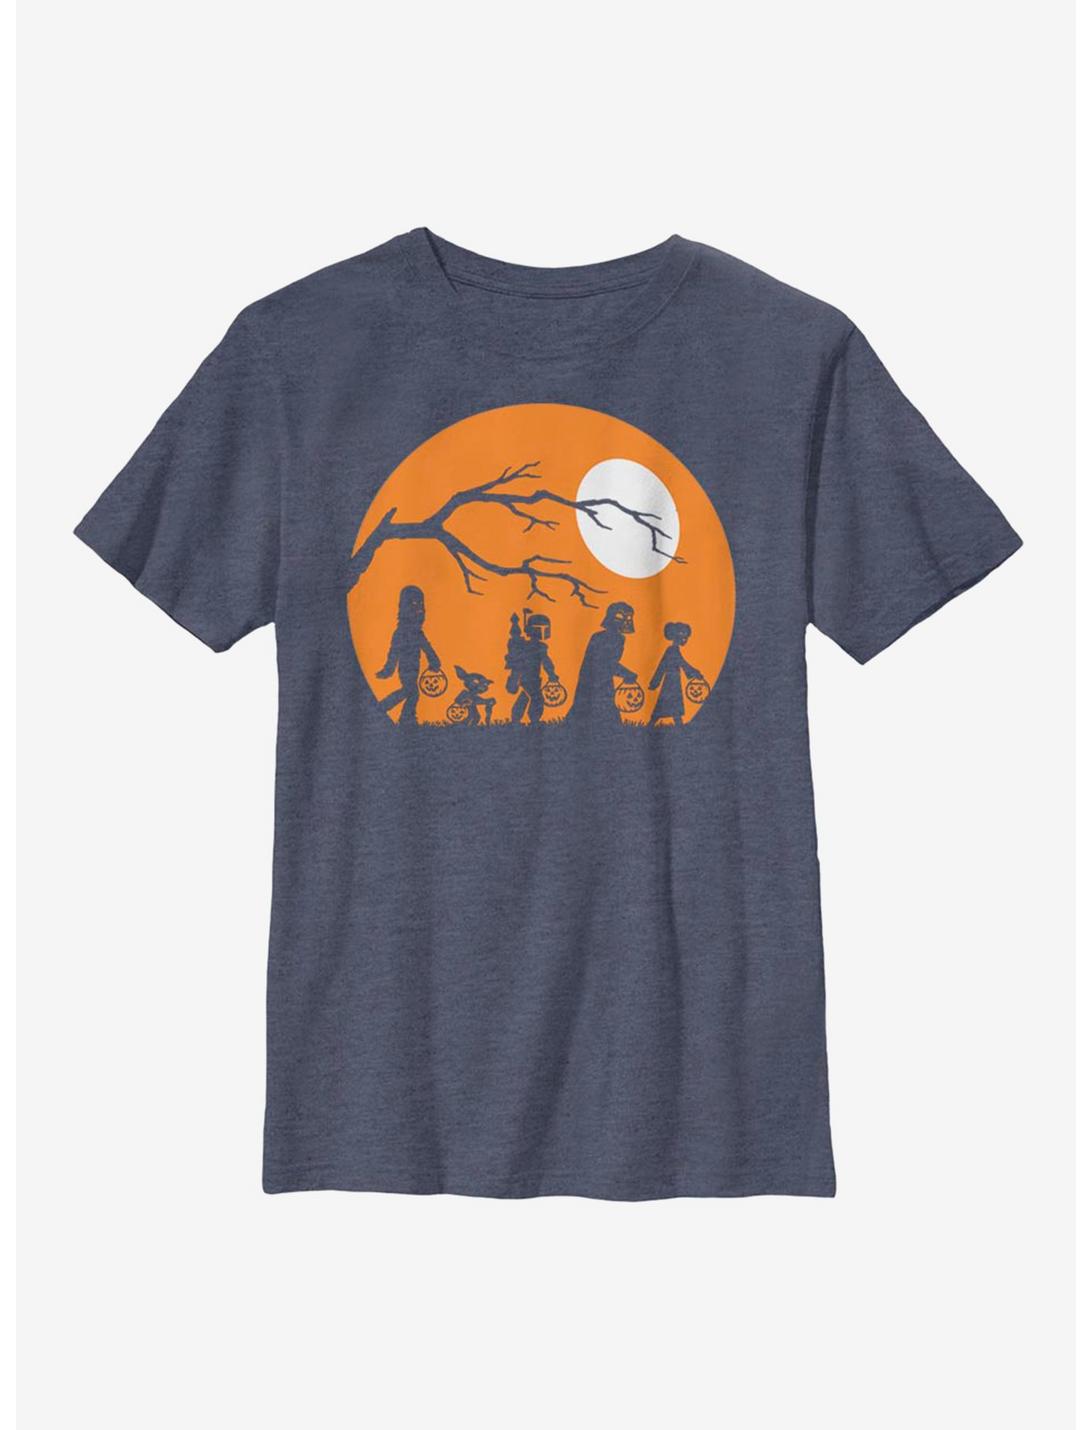 Star Wars The Haunt Youth T-Shirt, NAVY HTR, hi-res